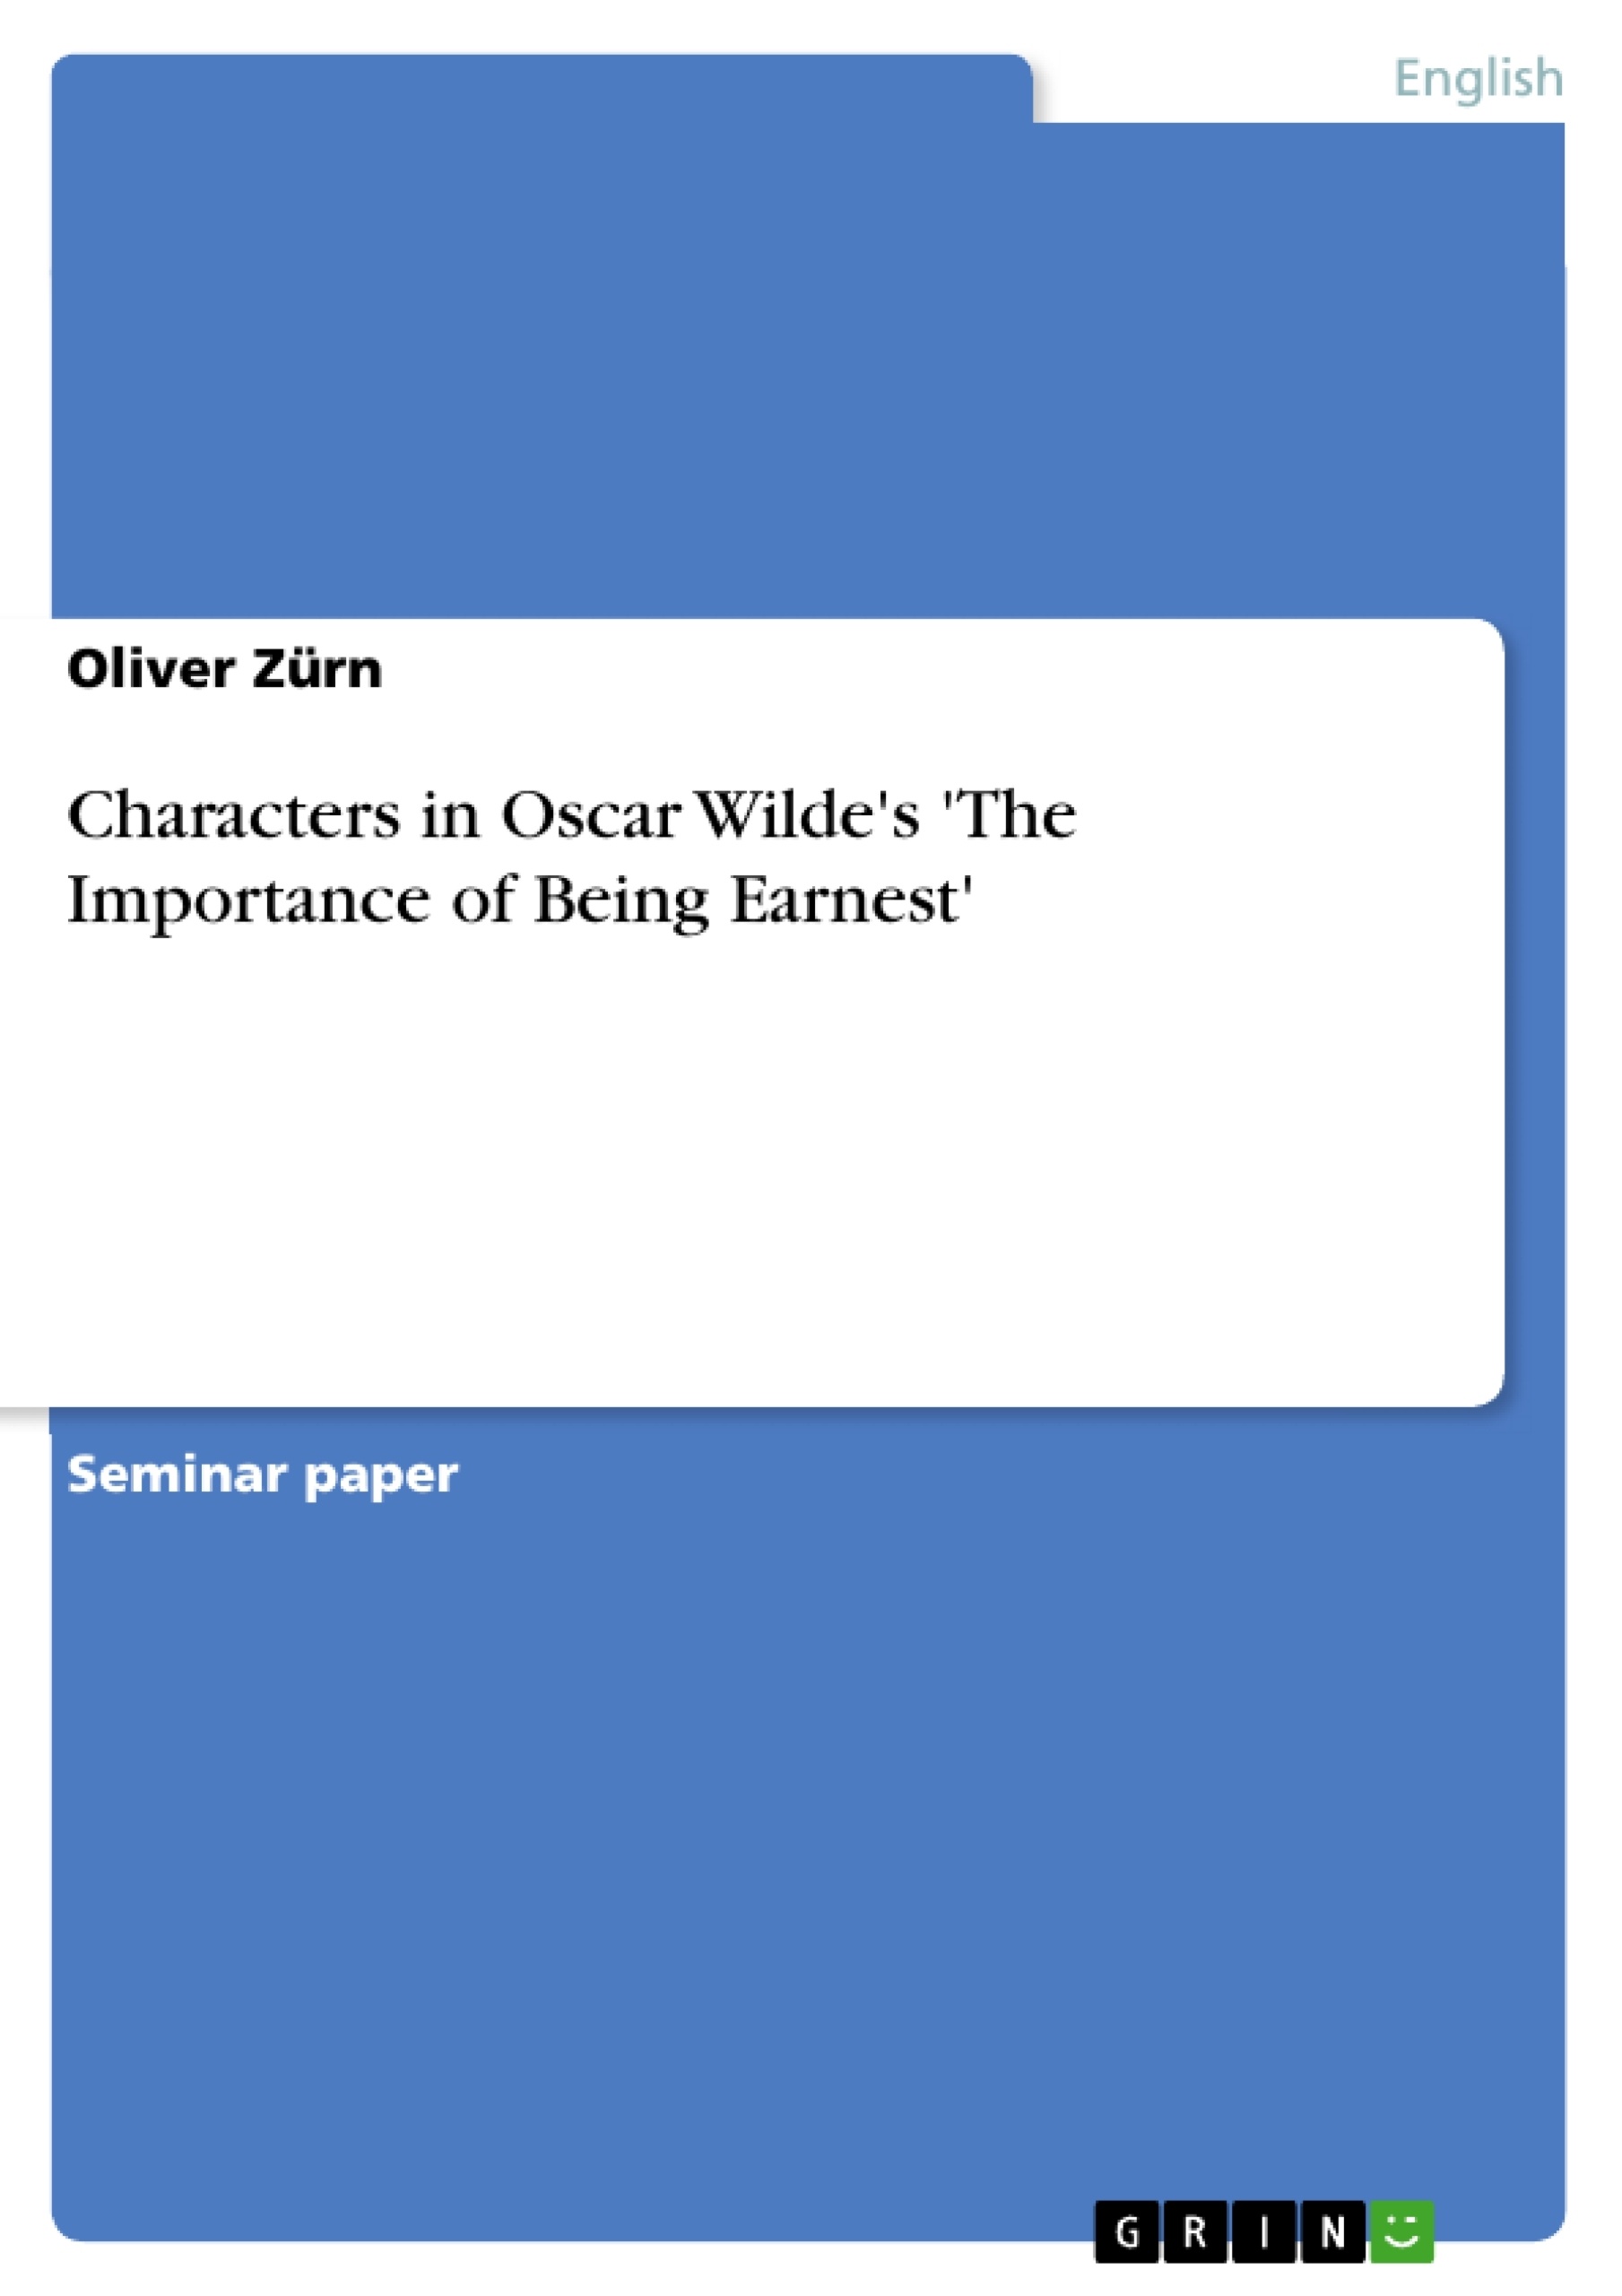 Titre: Characters in Oscar Wilde's 'The Importance of Being Earnest'